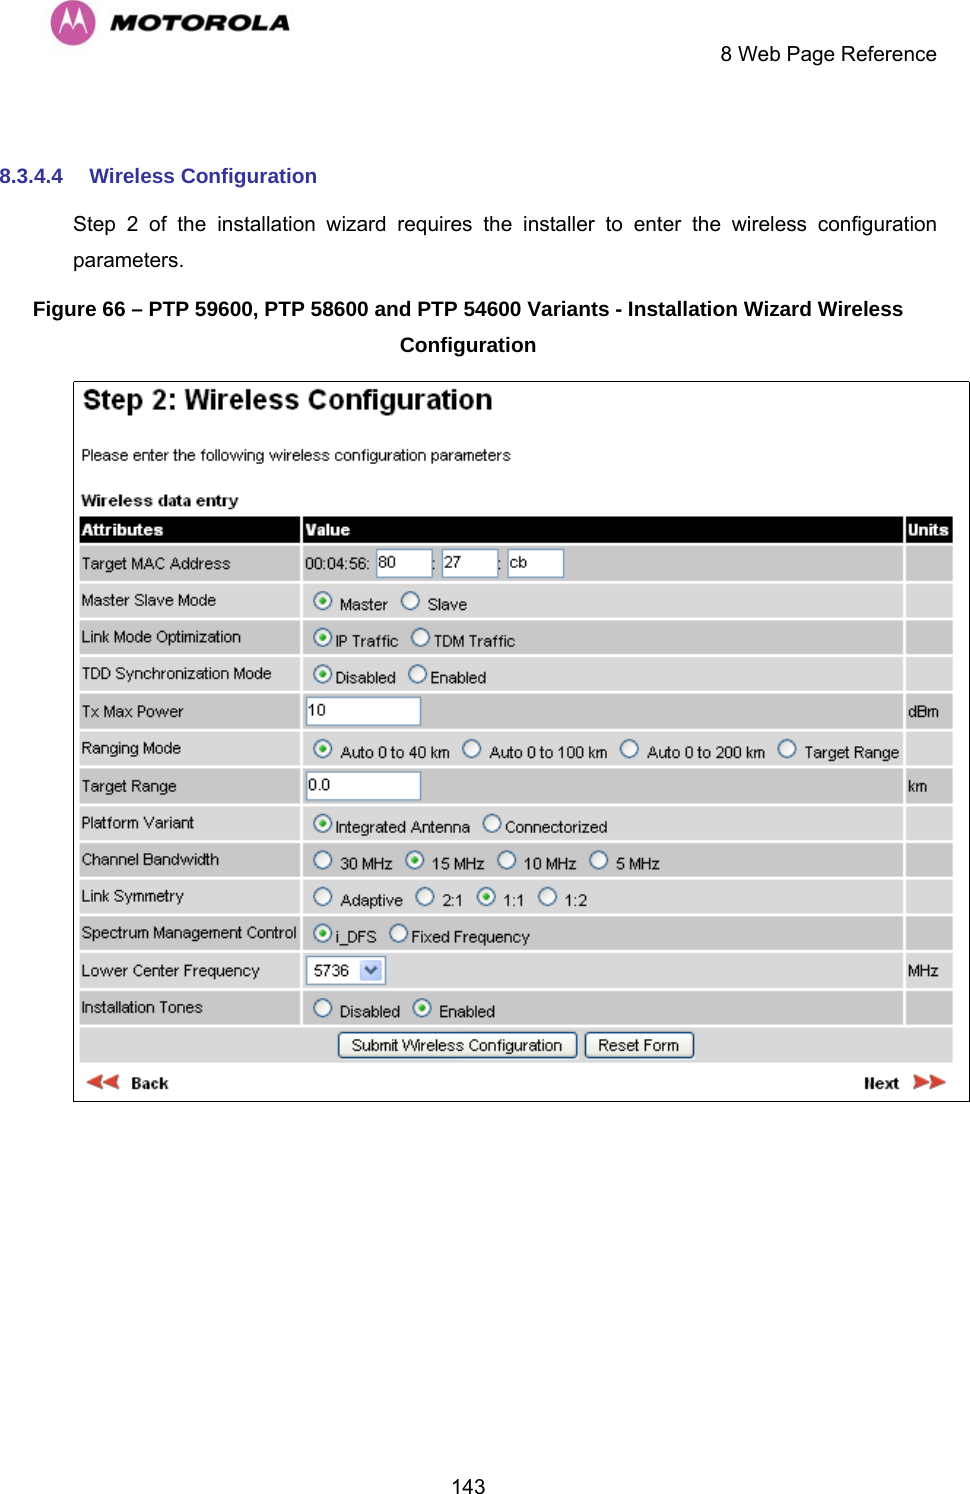     8 Web Page Reference  143 8.3.4.4  Wireless Configuration Step 2 of the installation wizard requires the installer to enter the wireless configuration parameters. Figure 66 – PTP 59600, PTP 58600 and PTP 54600 Variants - Installation Wizard Wireless Configuration  